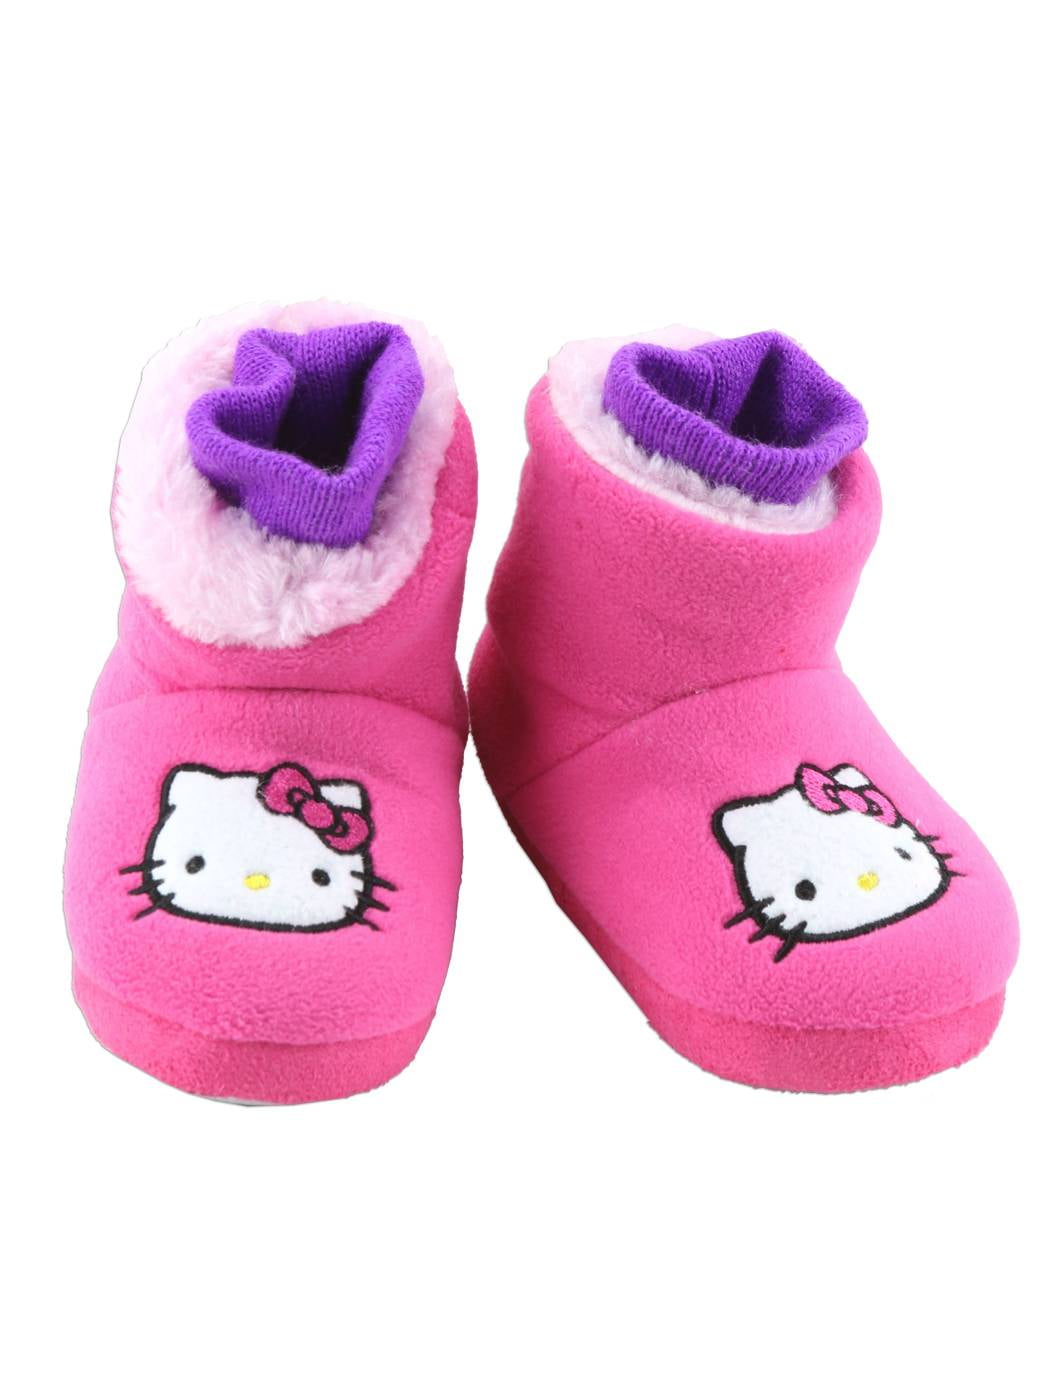 New HELLO KITTY Girls Bootie Style Slippers White Faux Fur Accent Sz 11-12 